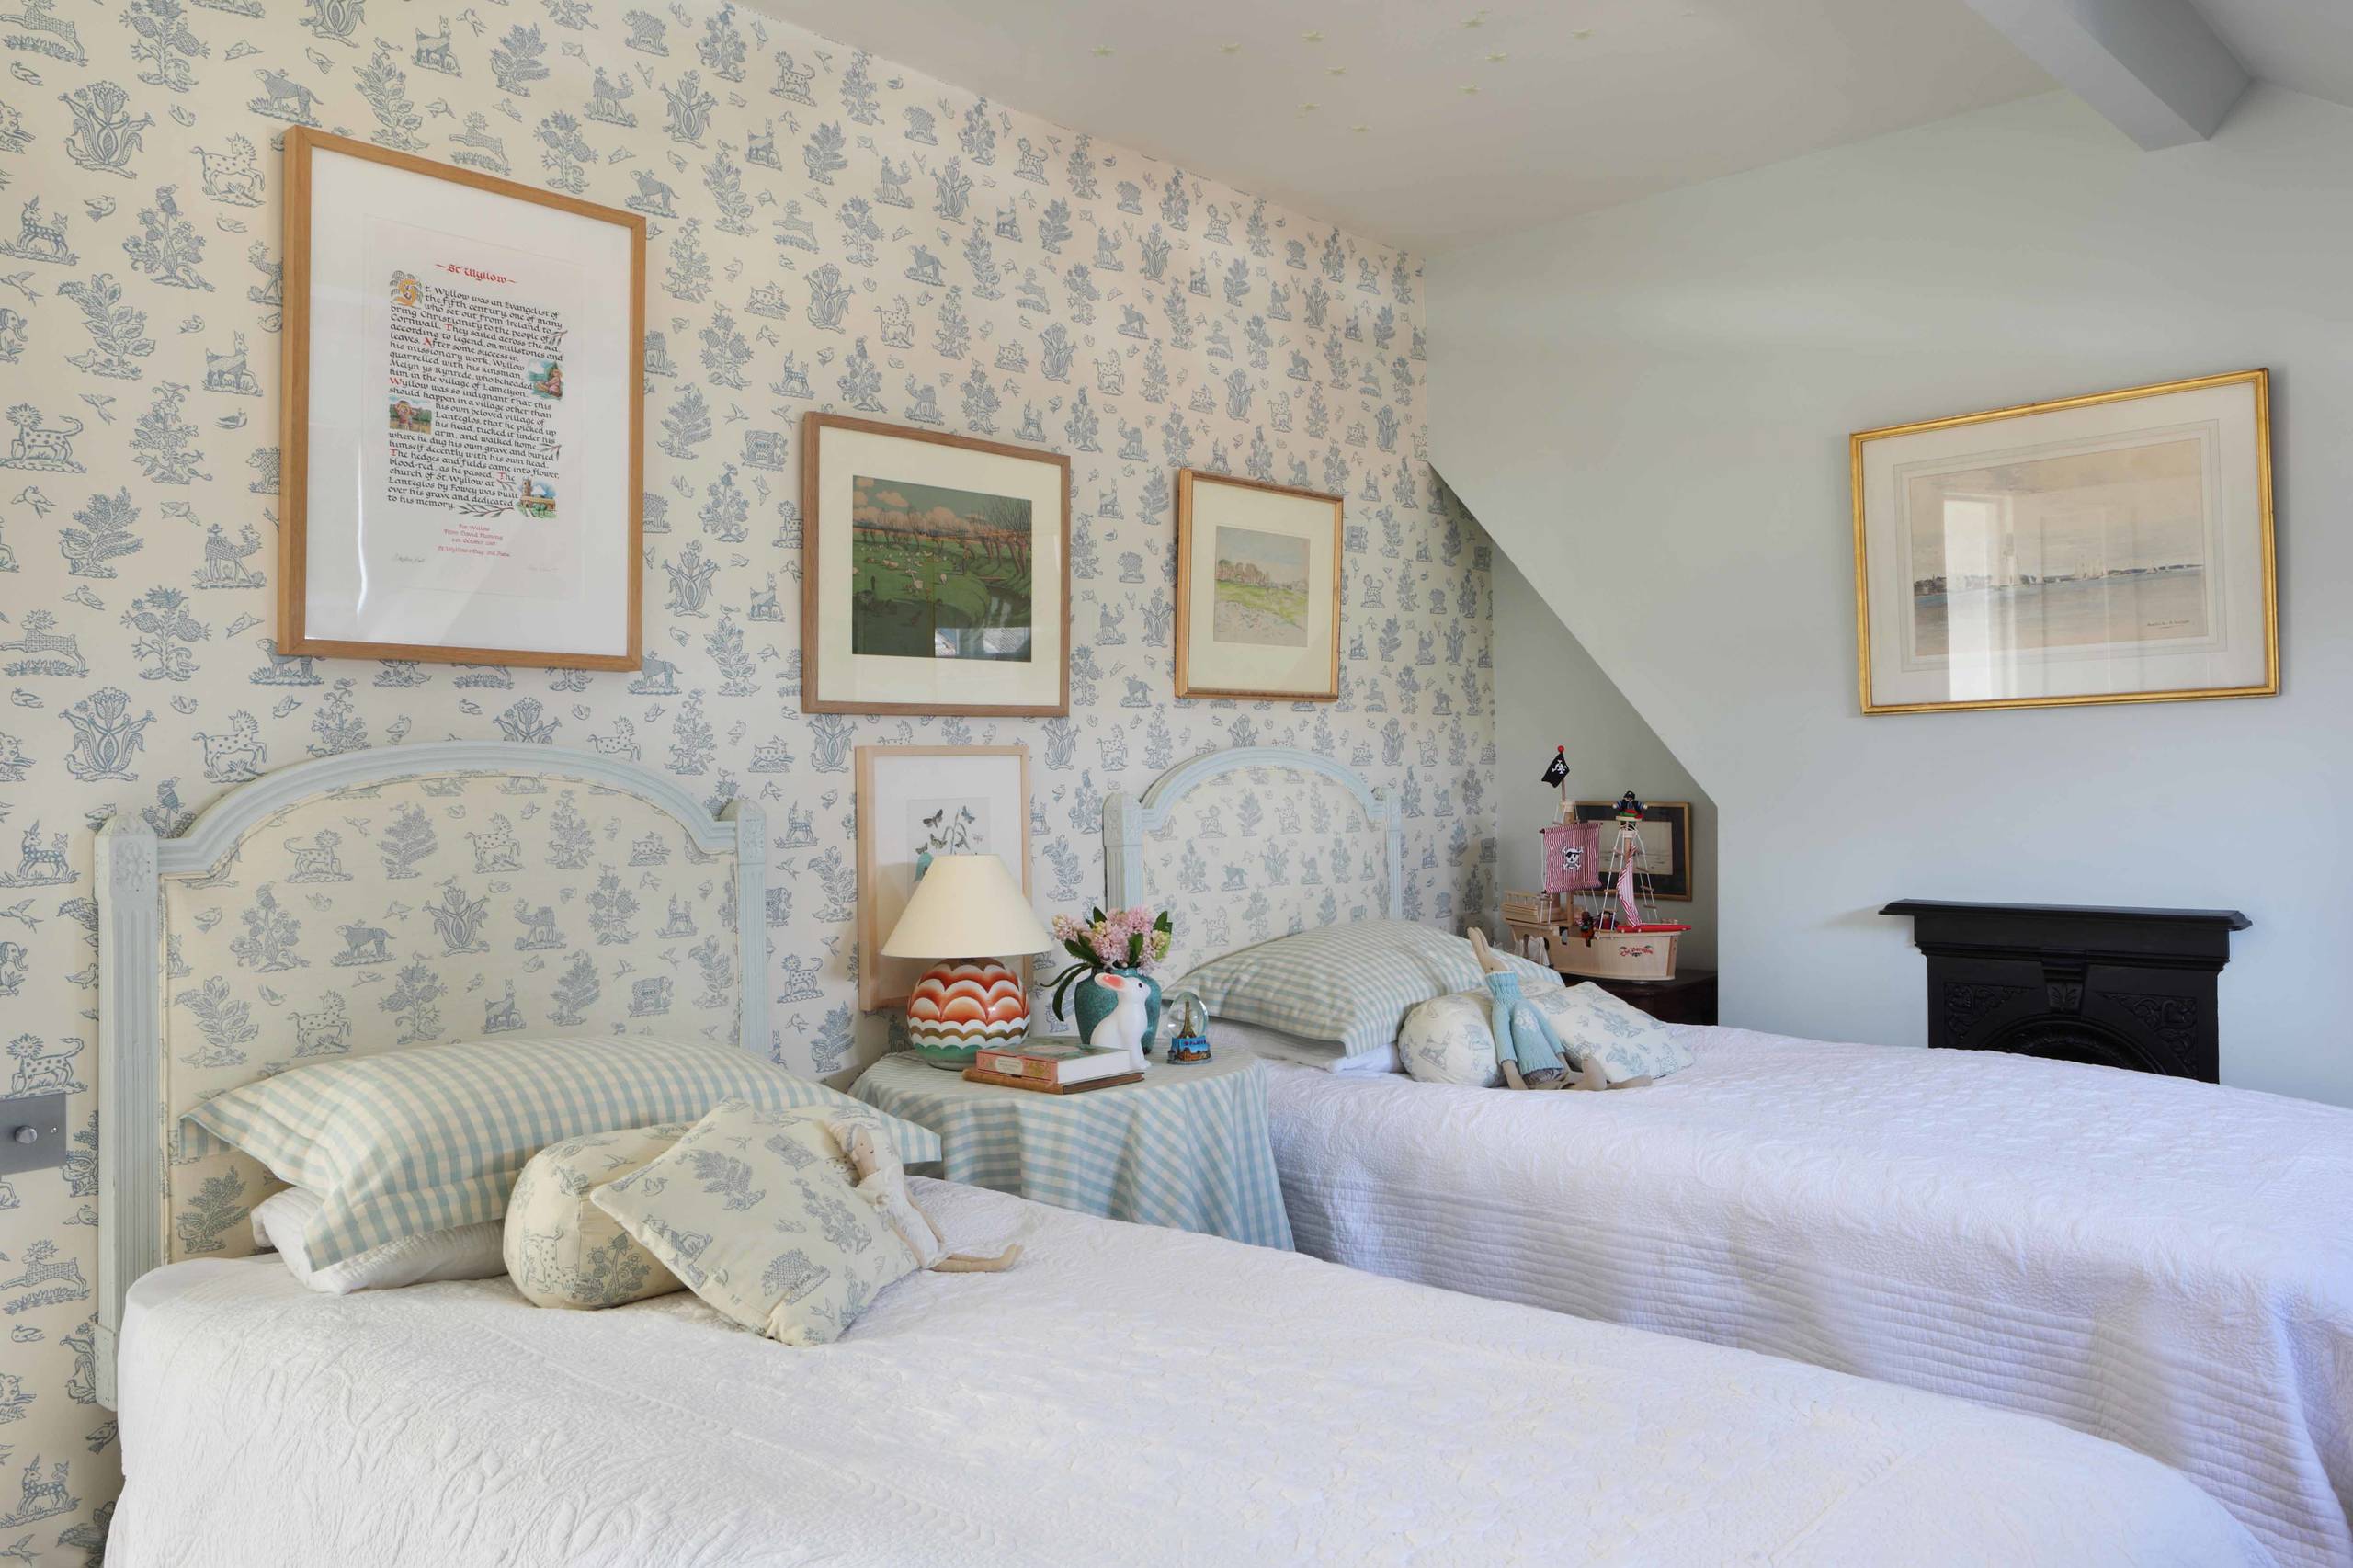 Decorating with gingham – 10 ways to use this classic print in your home